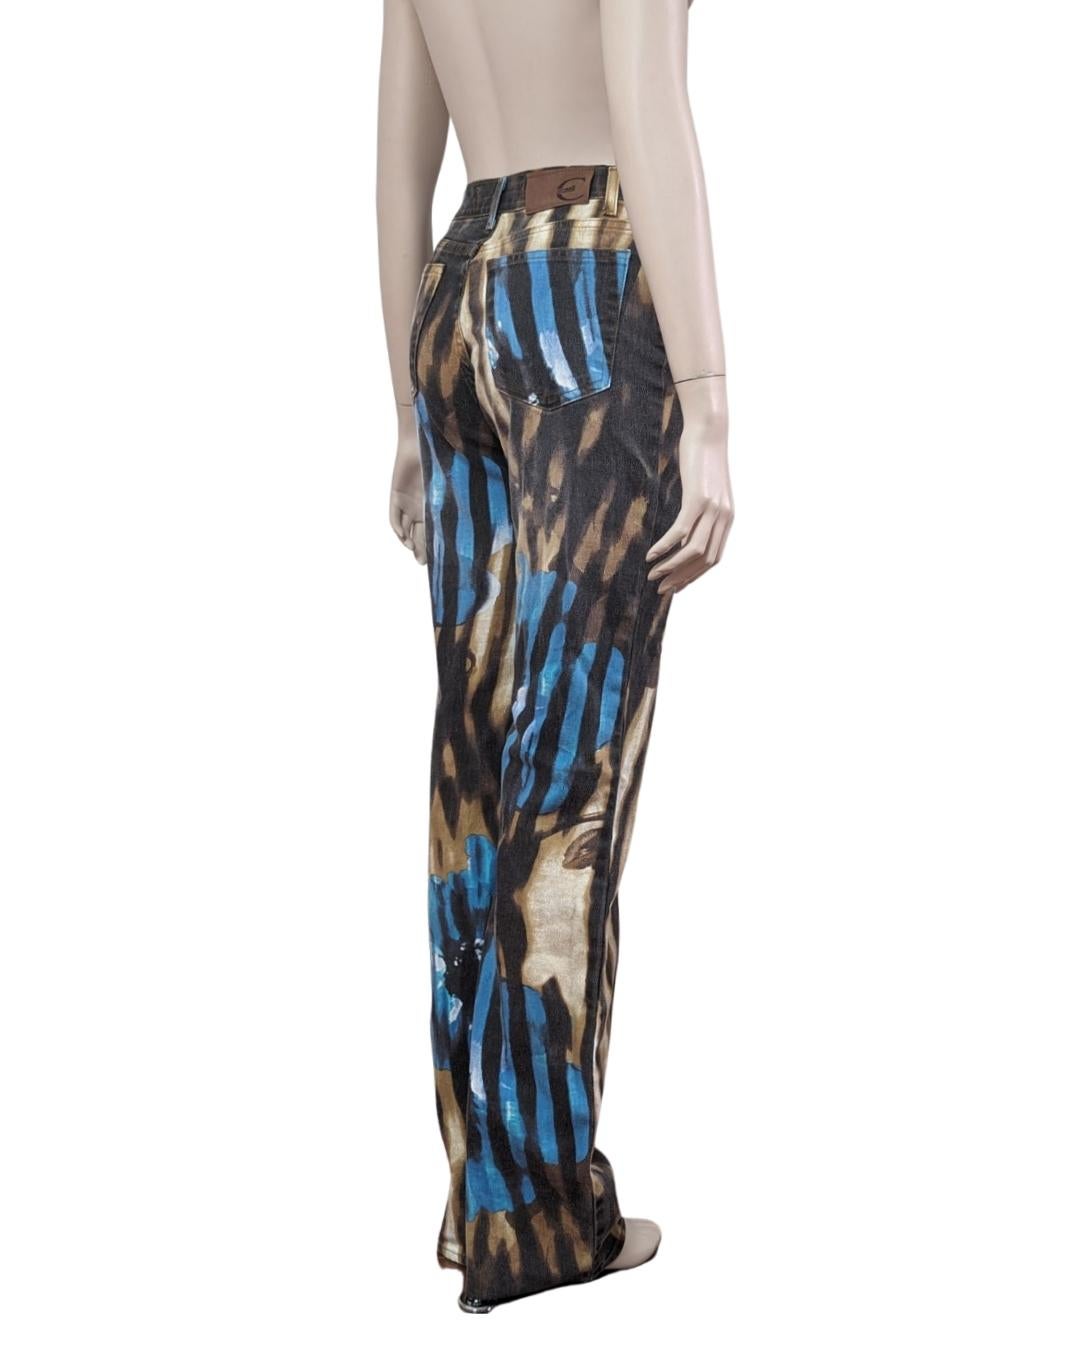 Roberto Cavalli - Just Cavalli line Abstract brown and turquoise pants For Sale 1